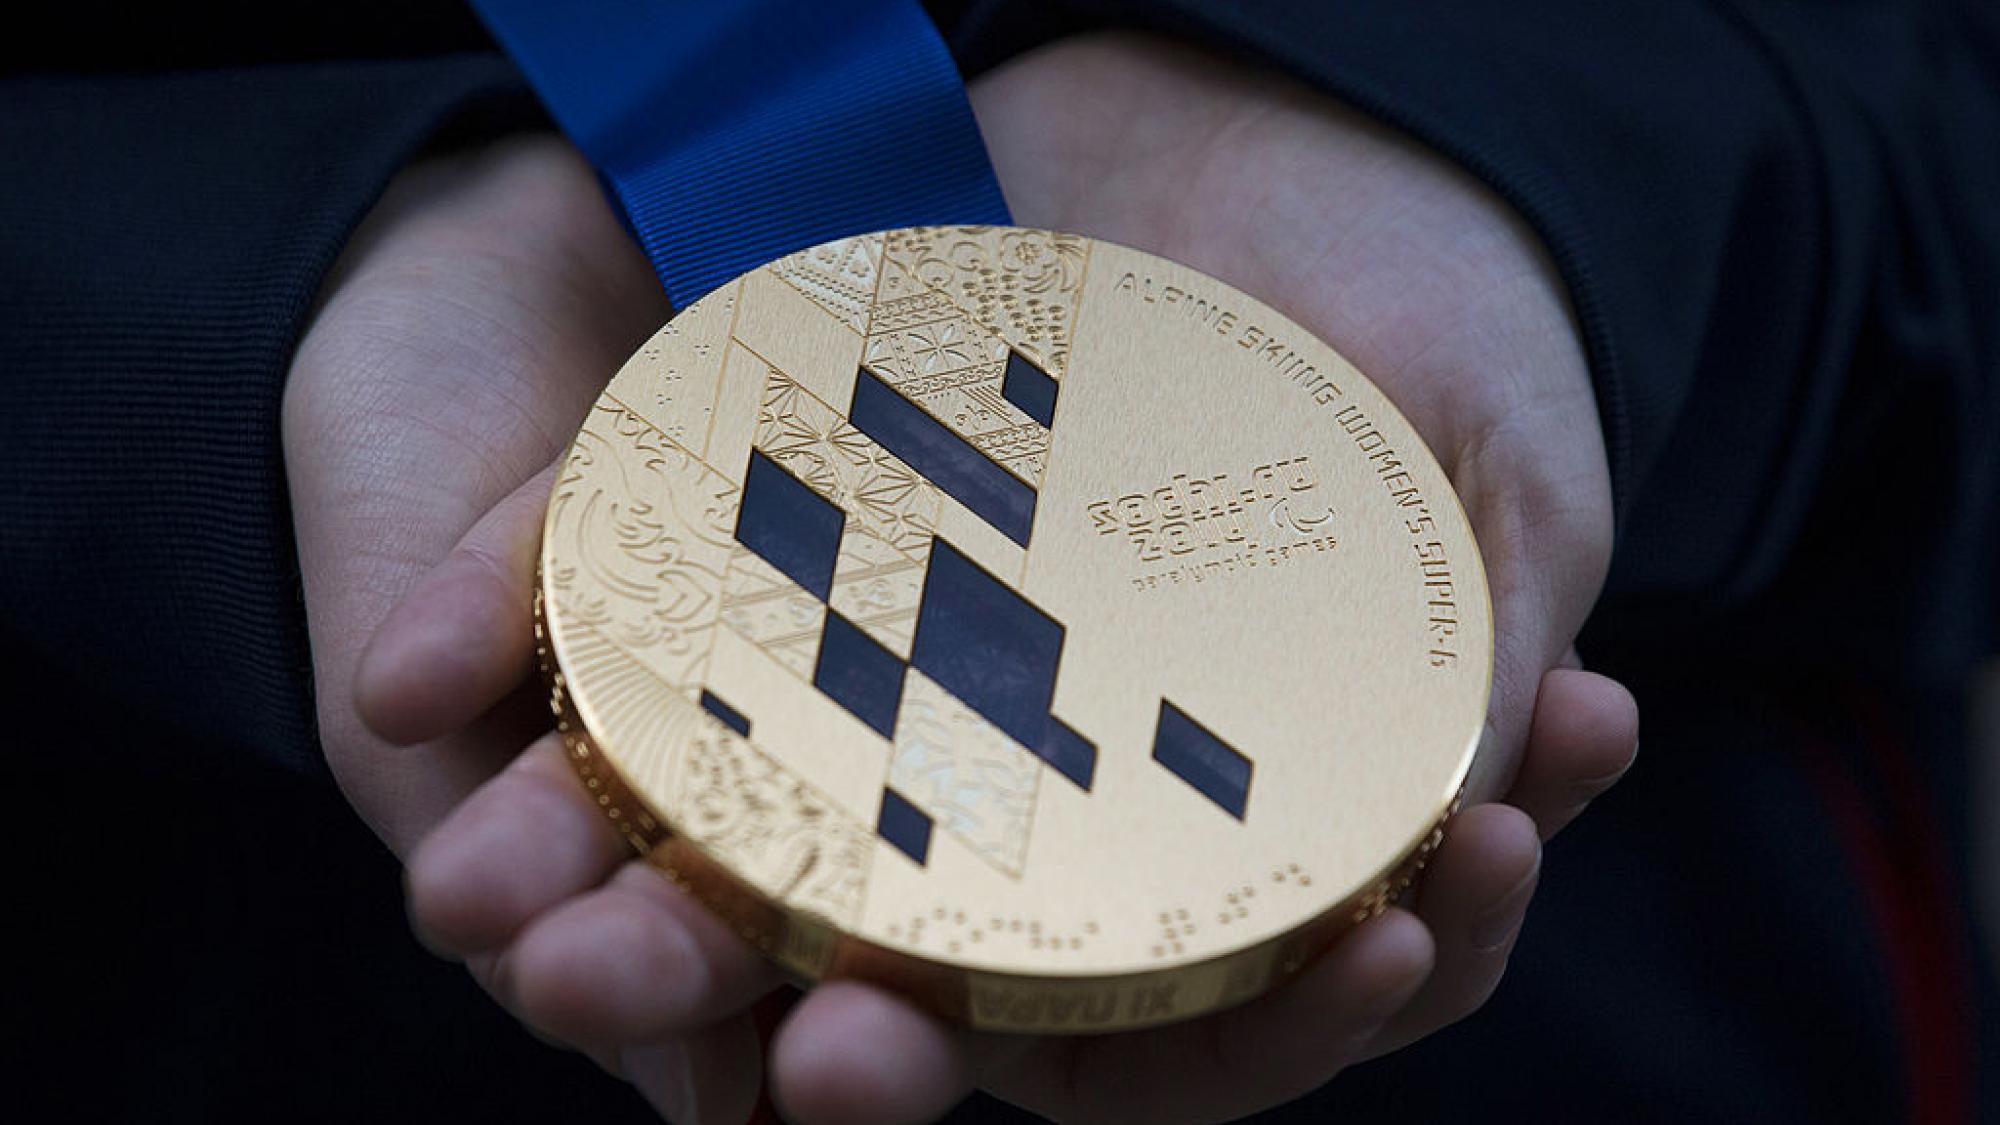 The photo shows a gold medal from Sochi 2014.